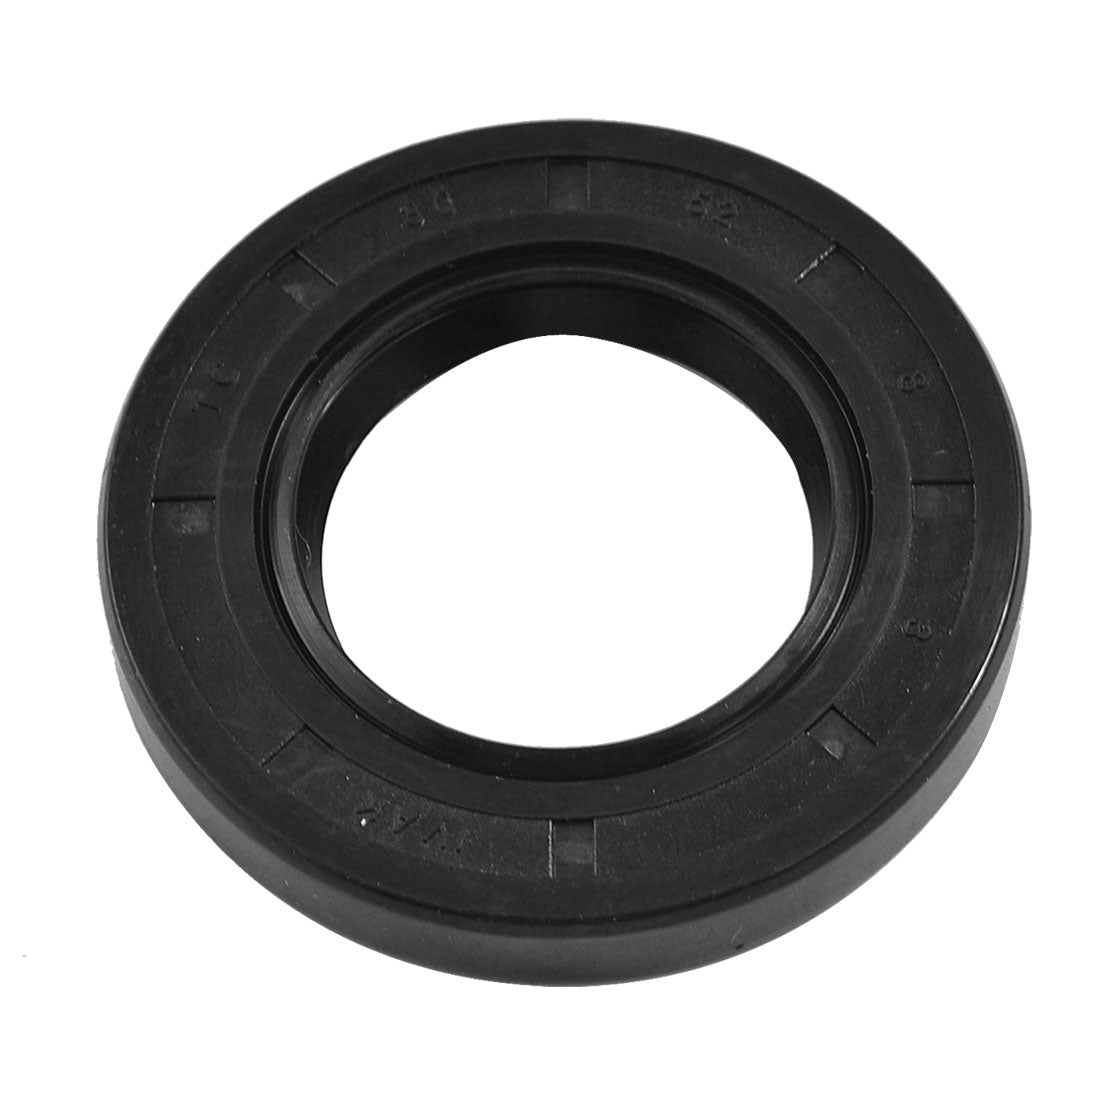 uxcell Uxcell Oil Seal, Nitrile Butadiene Rubber Black Pack of 1